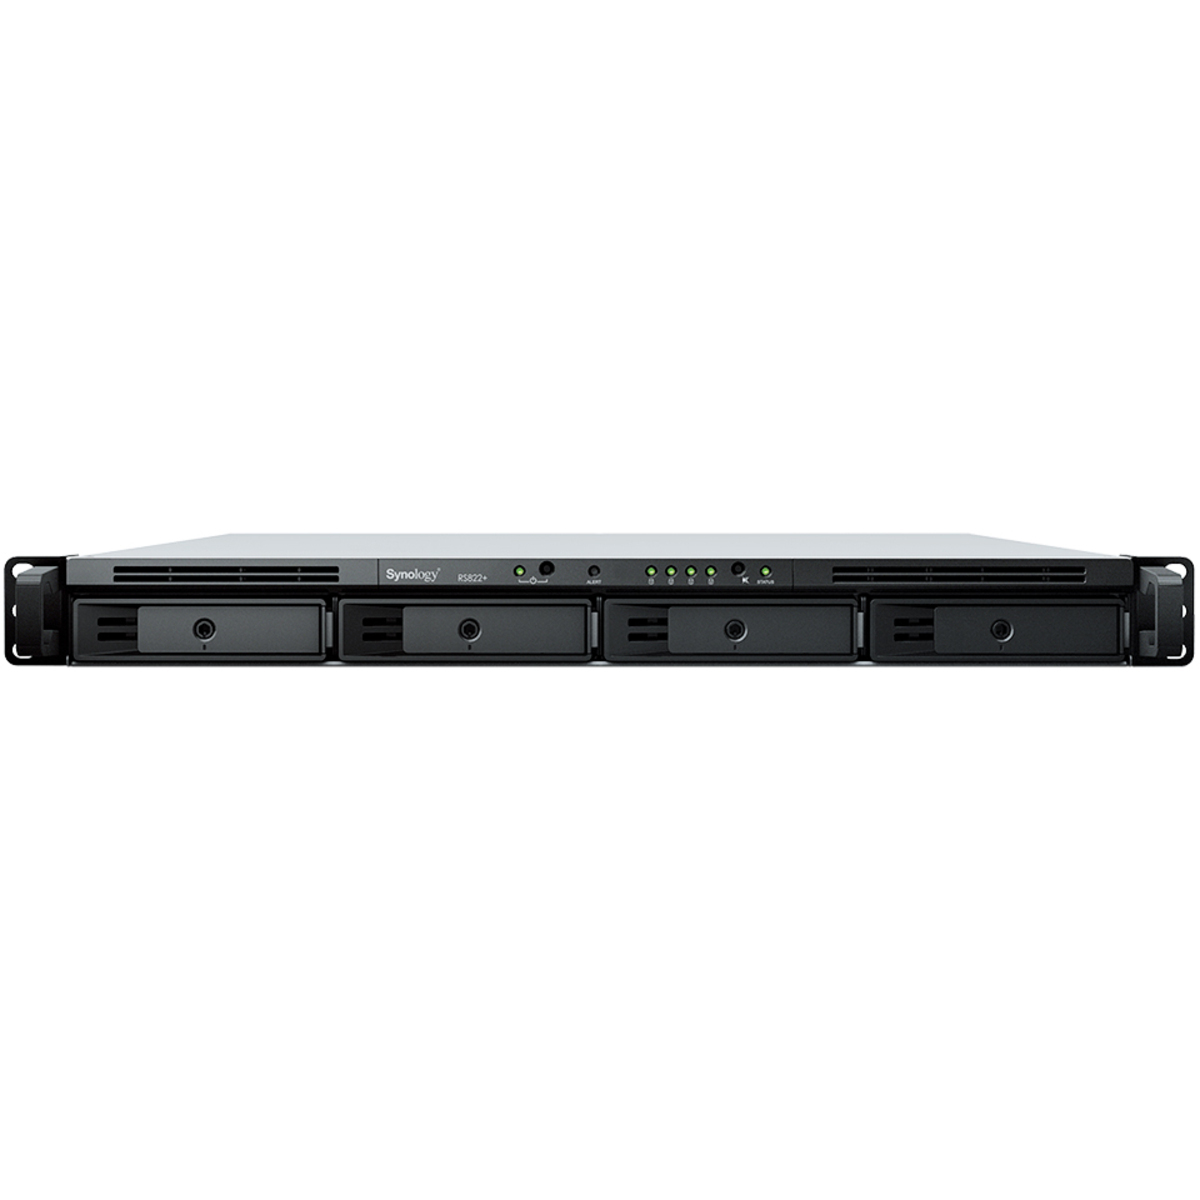 Synology RackStation RS822RP+ 48tb 4-Bay RackMount Multimedia / Power User / Business NAS - Network Attached Storage Device 4x12tb Seagate IronWolf Pro ST12000NT001 3.5 7200rpm SATA 6Gb/s HDD NAS Class Drives Installed - Burn-In Tested - ON SALE - FREE RAM UPGRADE RackStation RS822RP+